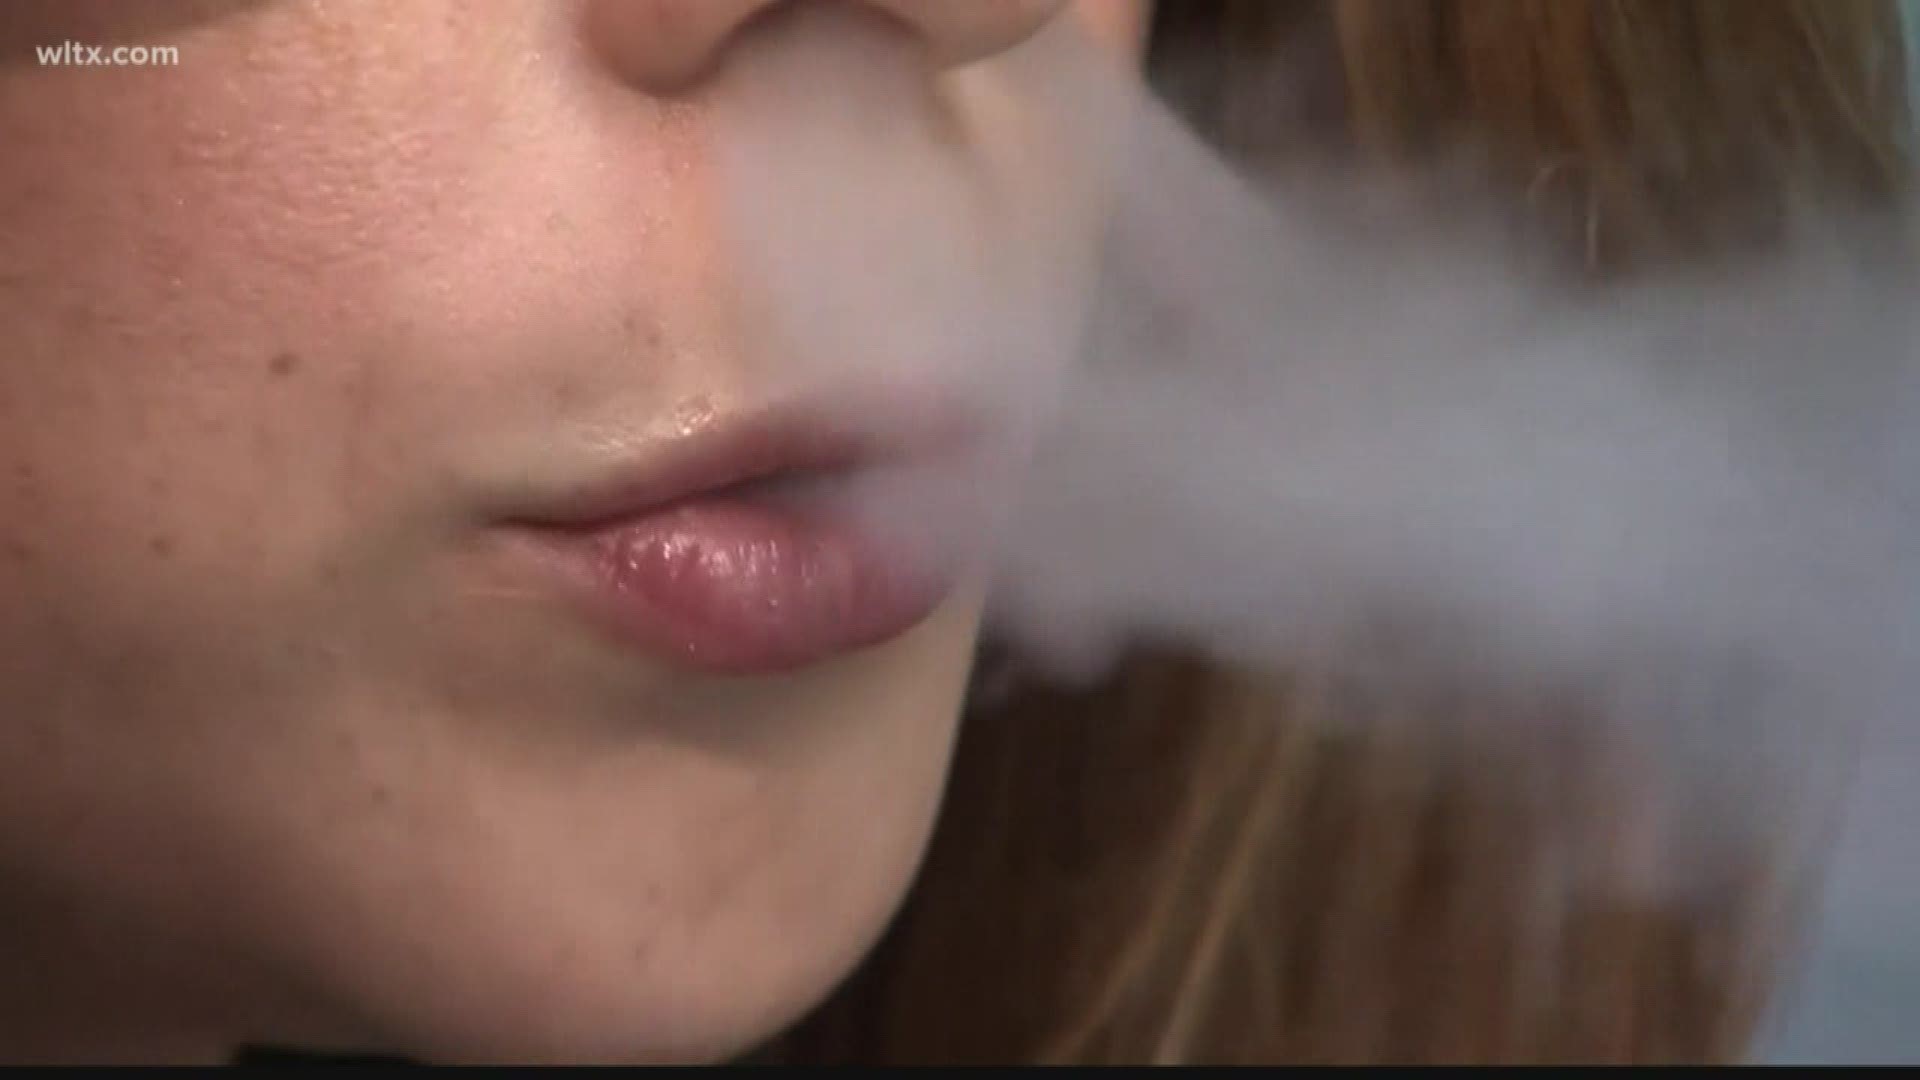 Some SC lawmakers are considering a ban on flavored e-cigarette and vaping products as concern over potentially related illnesses is on the rise.